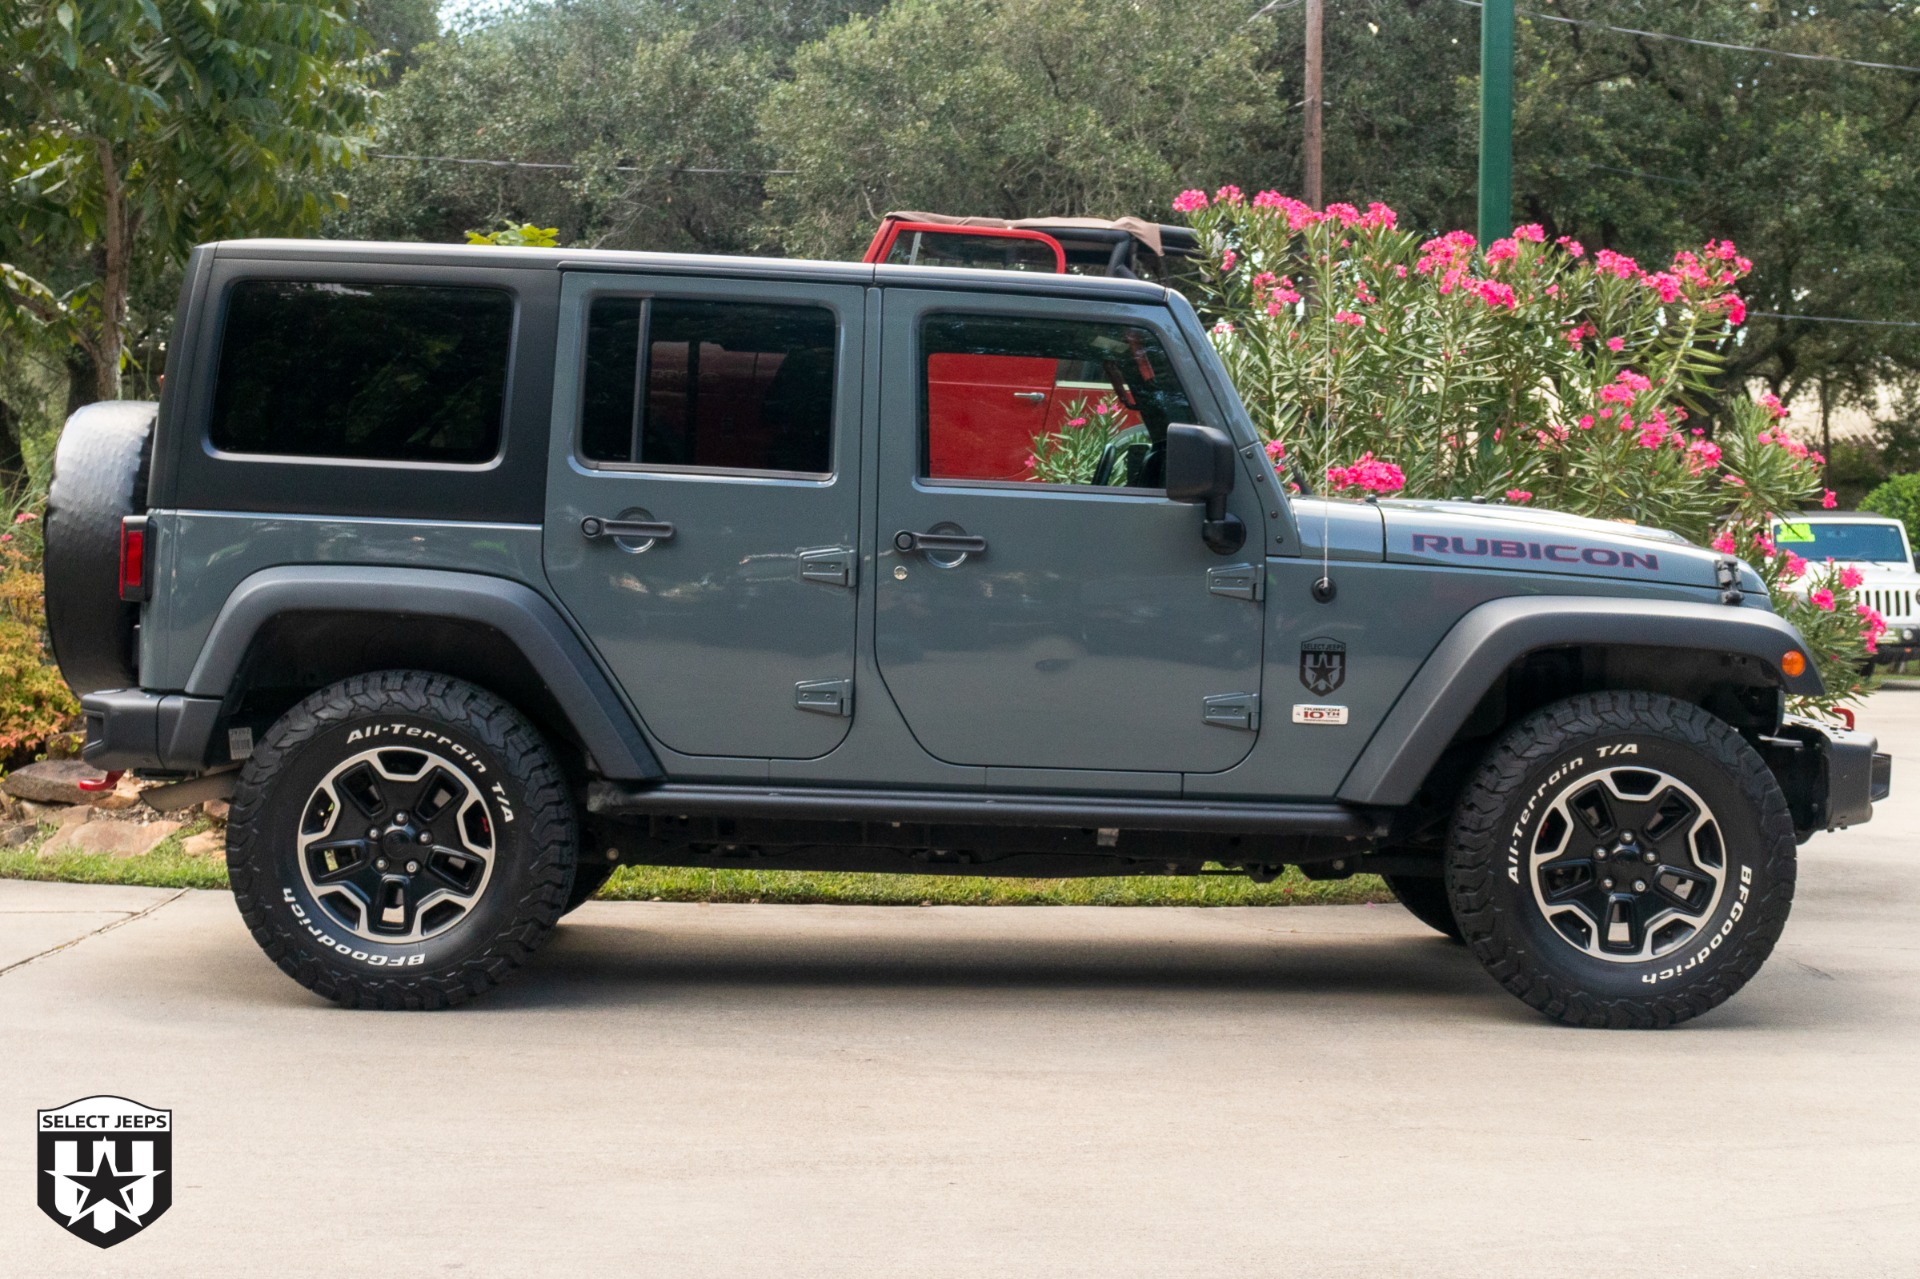 Used-2013-Jeep-Wrangler-Unlimited-Rubicon-10th-Anniversary